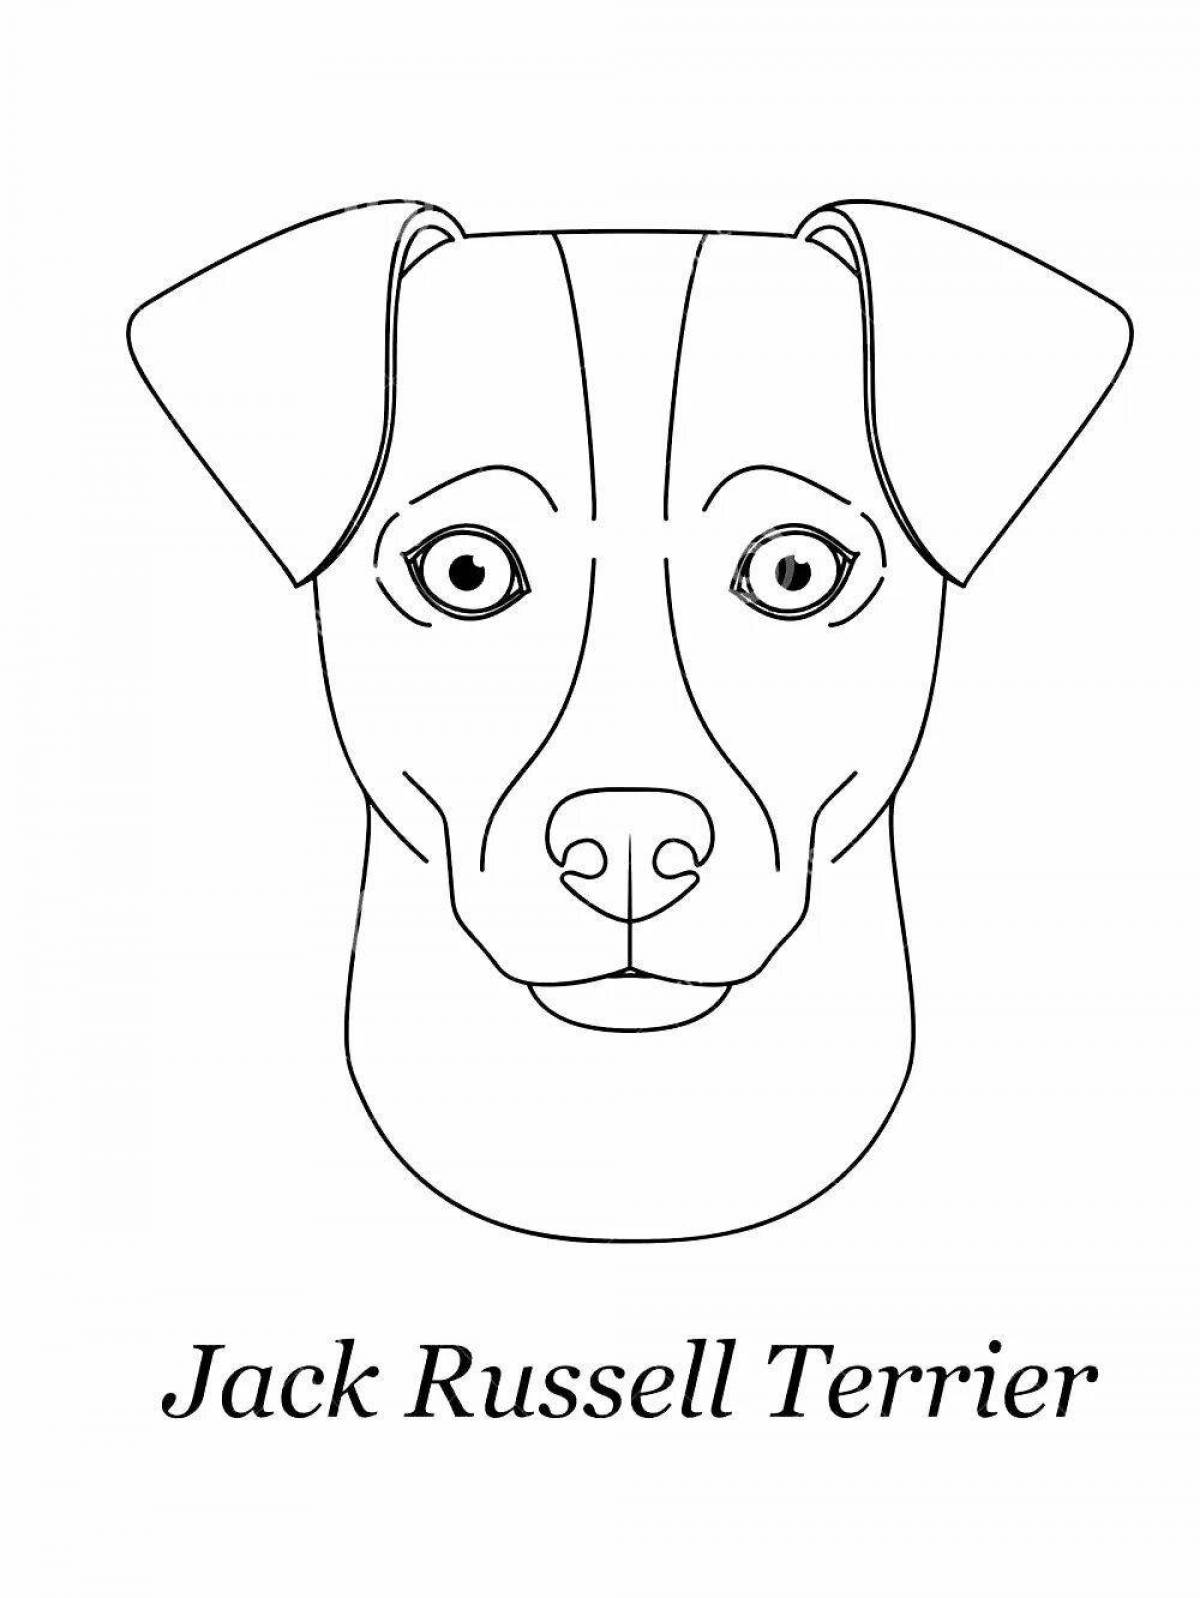 Attractive jack russell terrier coloring book